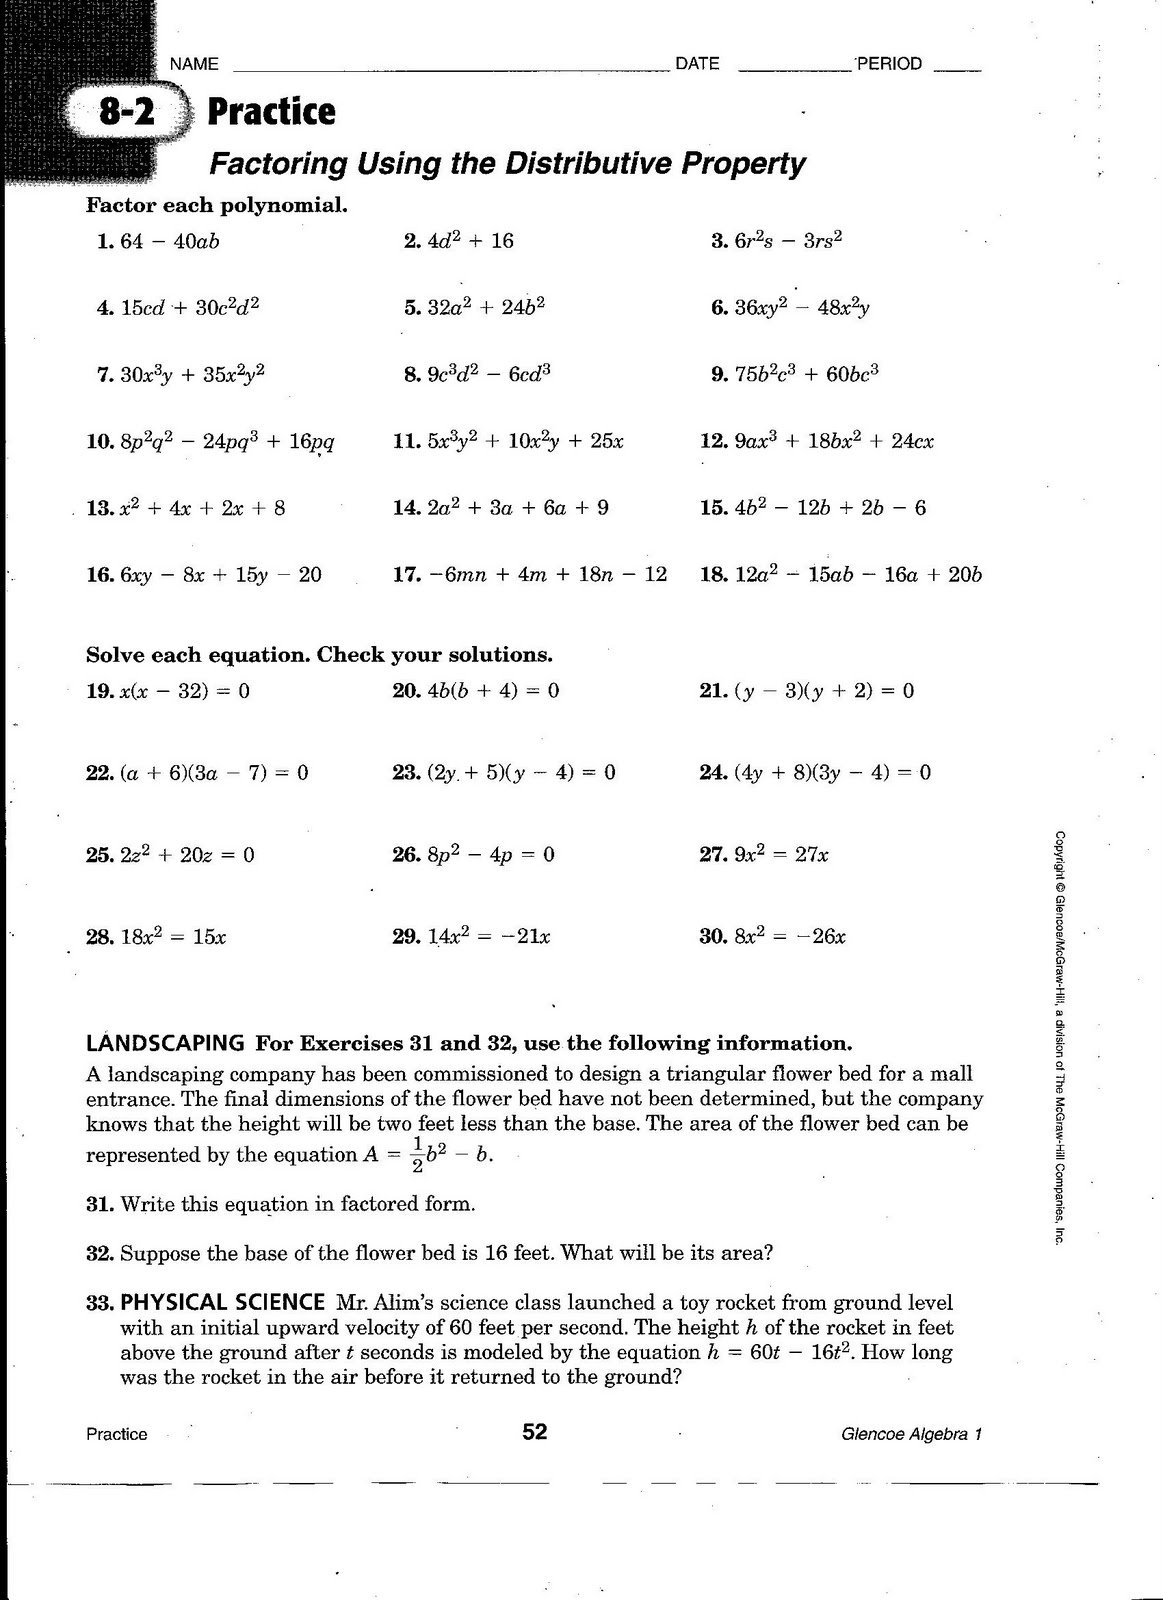 Help With Distributive Property Homework Thermodynamics Homework Help In Factoring Using The Distributive Property Worksheet Answers